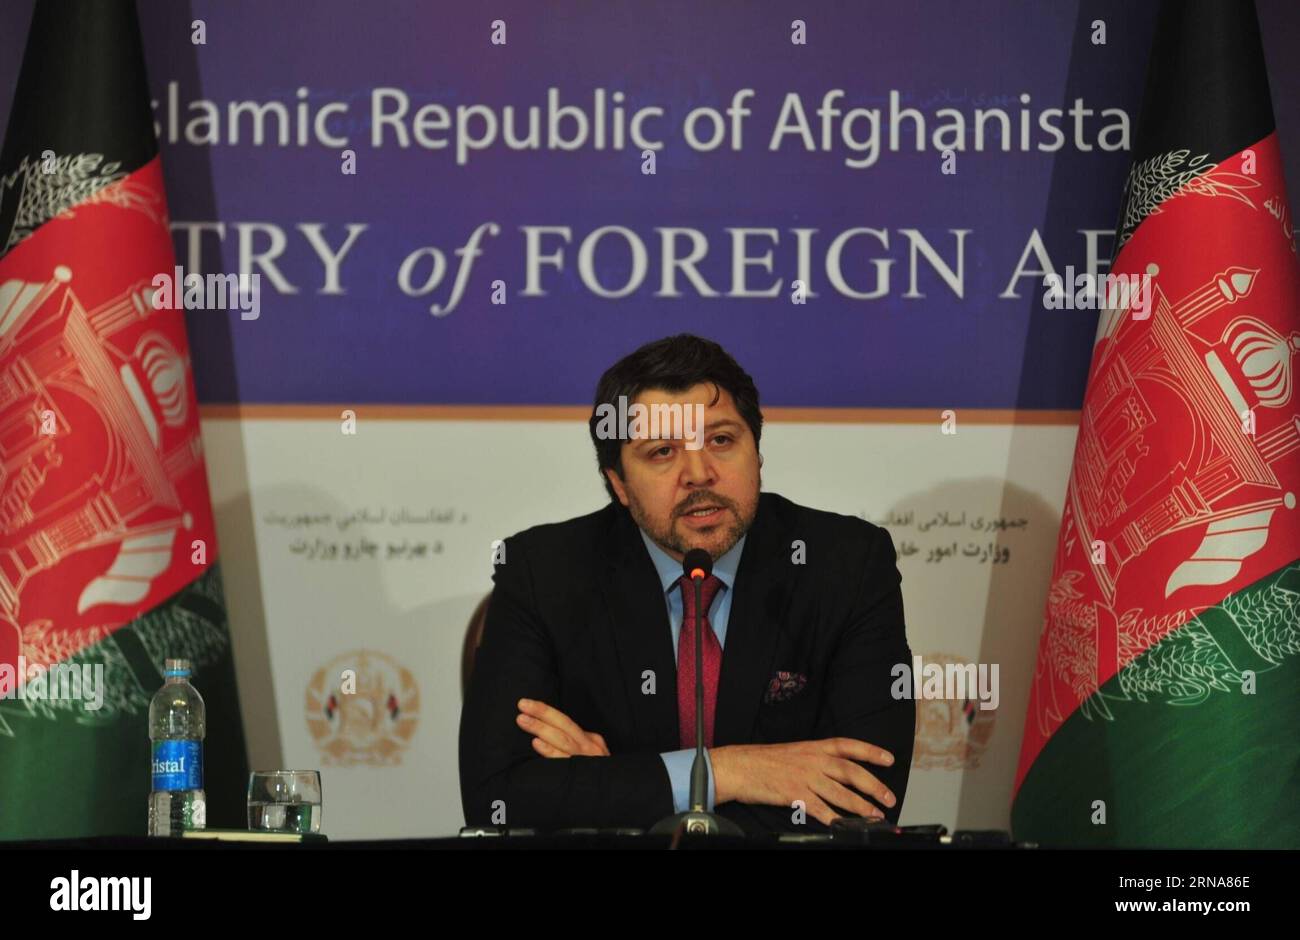 (160112) -- KABUL, Jan. 12, 2016 -- Afghan Deputy Foreign Minister Hekmat Khalil Karzai speaks during a press conference in Kabul, Afghanistan, Jan. 12, 2016. The second round of four-party meeting on Afghan peace process will be held in Kabul on Jan. 18. The delegations were led by Afghan Deputy Foreign Minister Hekmat Khalil Karzai, Pakistan s Foreign Secretary Aizaz Ahmad Chaudhry, the U.S. Special Representative for Afghanistan and Pakistan Richard G. Olson and China s Special Envoy for Afghanistan Deng Xijun. ) (djj) AFGHANISTAN-KABUL-PEACE TALKS Rahmin PUBLICATIONxNOTxINxCHN   160112 Kab Stock Photo